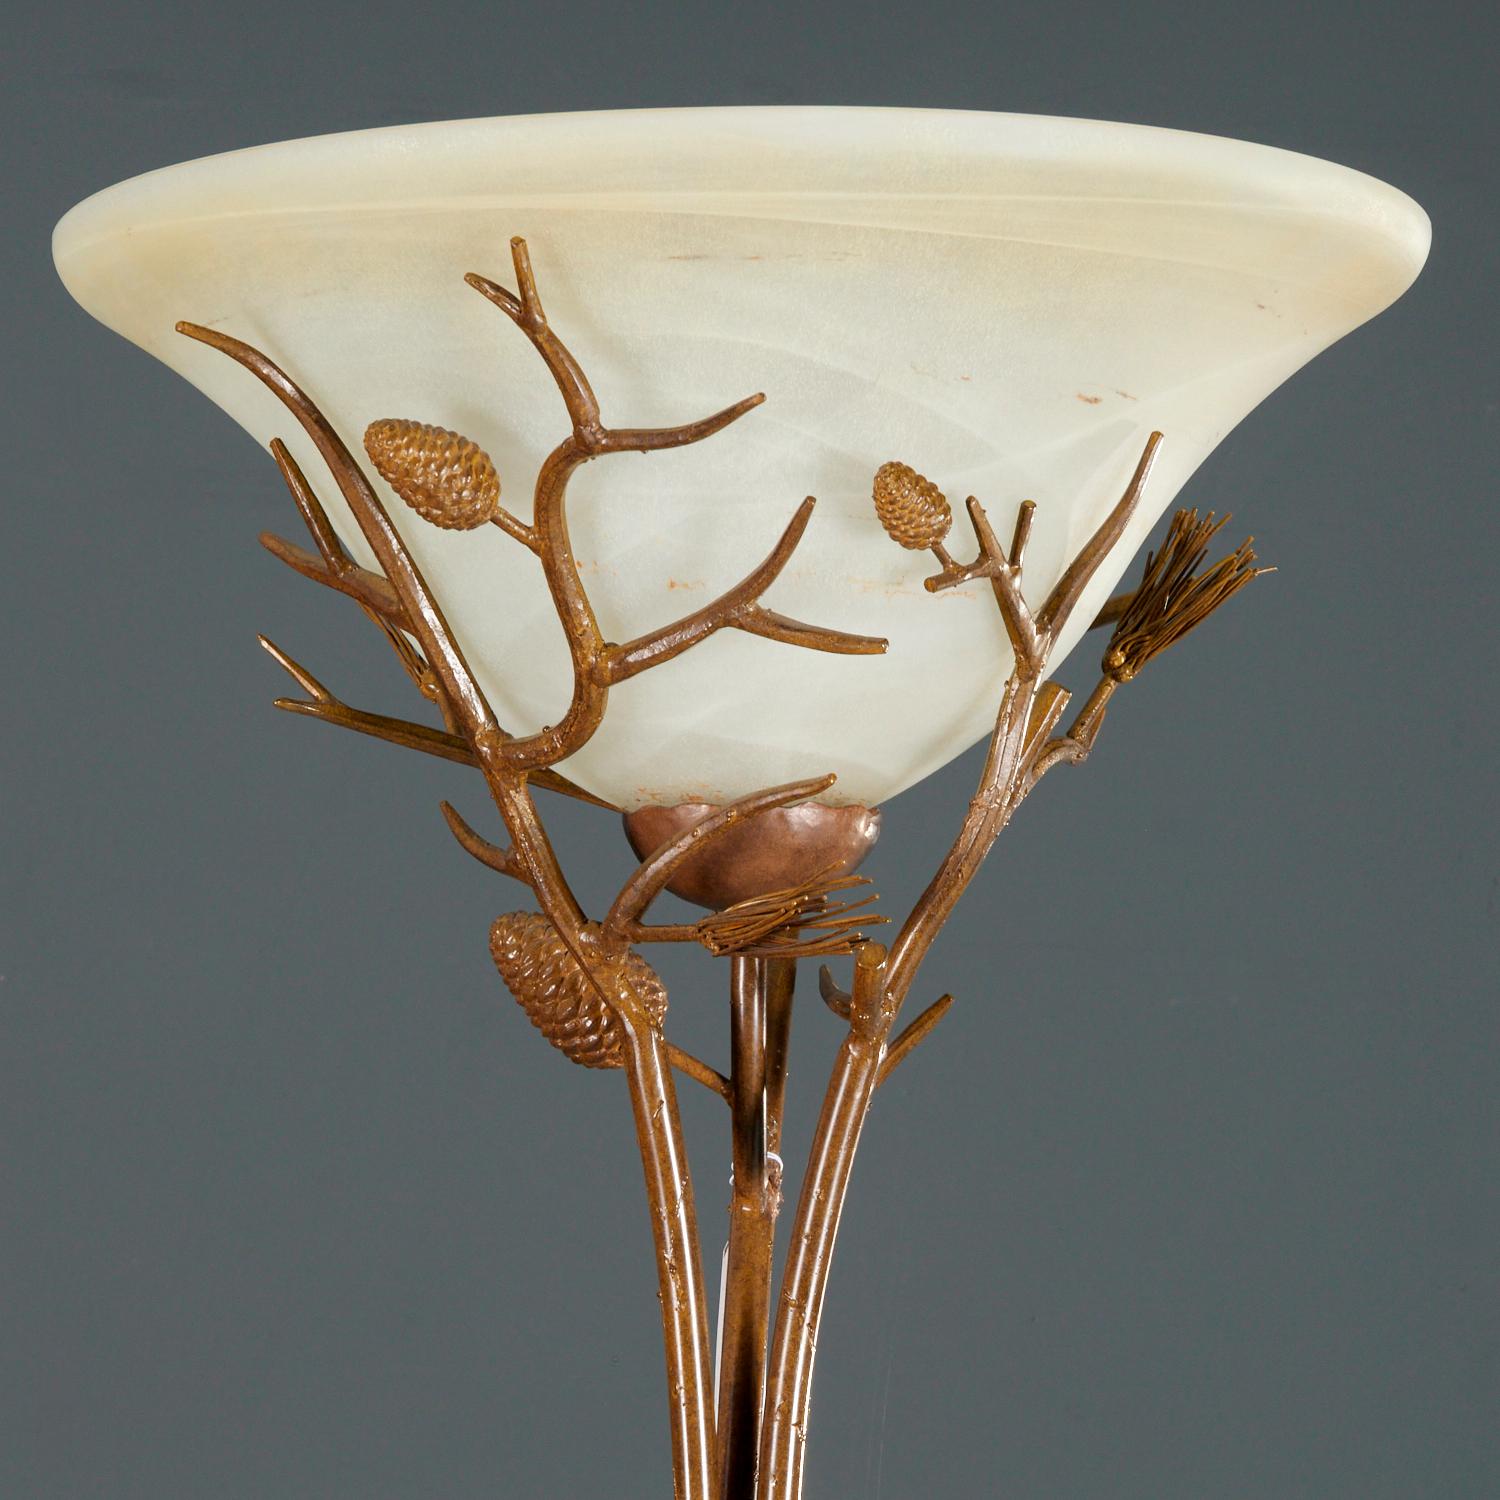 Late 20th c., an attractive torchiere style floor lamp with patinated metal branch and leaf design with glass dome shade, unmarked. The glass shade is held up by depictions of fir pine cones and needles rendered in metal.  

Dimensions:
71.75